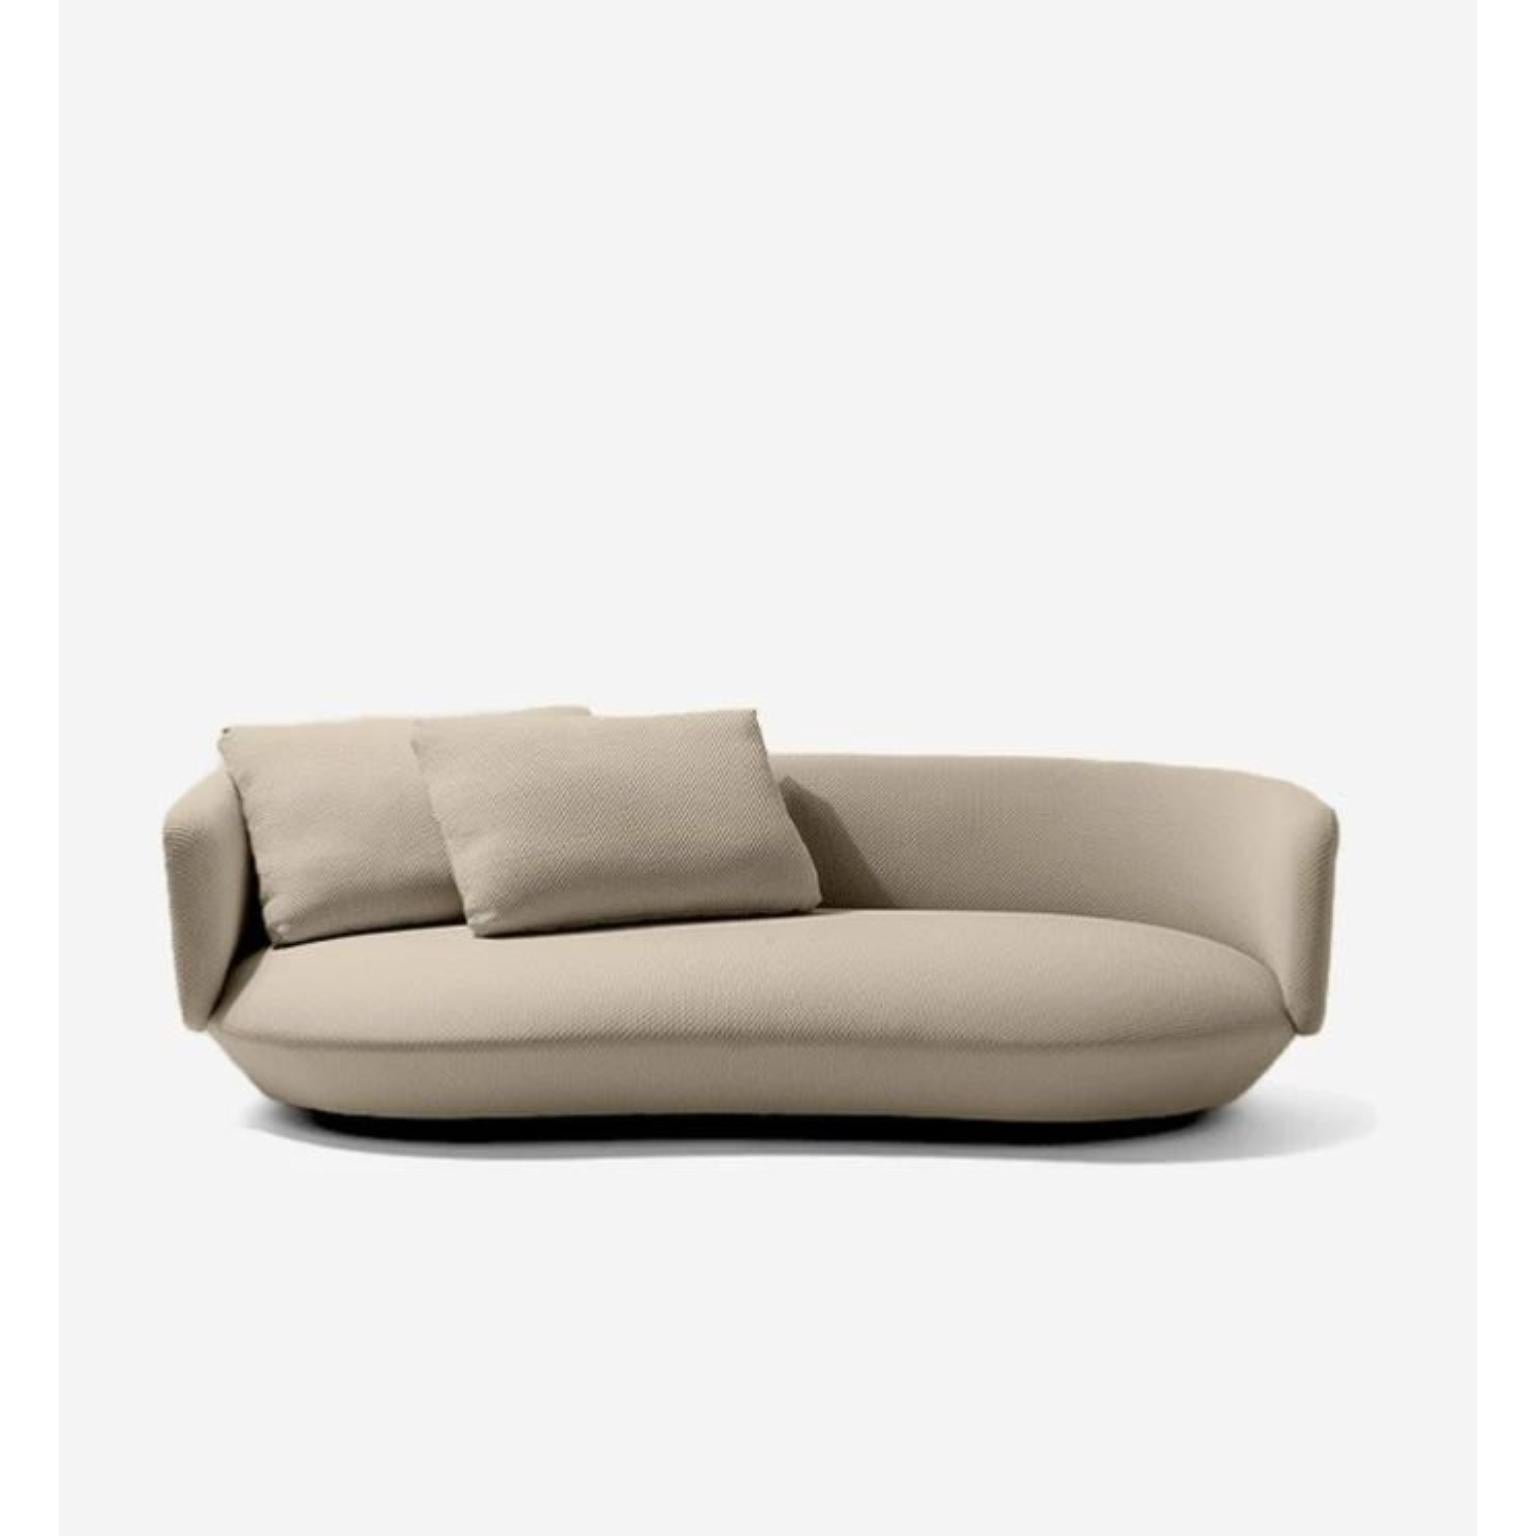 Small Baixo Sofa by Wentz
Dimensions: D 105 x W 200 x H 58 cm
Materials: Wood, Upholstery.
2 cushions included

The Baixo sofa proposes a different way of sitting. An invitation to casual comfort, closer to the ground. The organic structure is